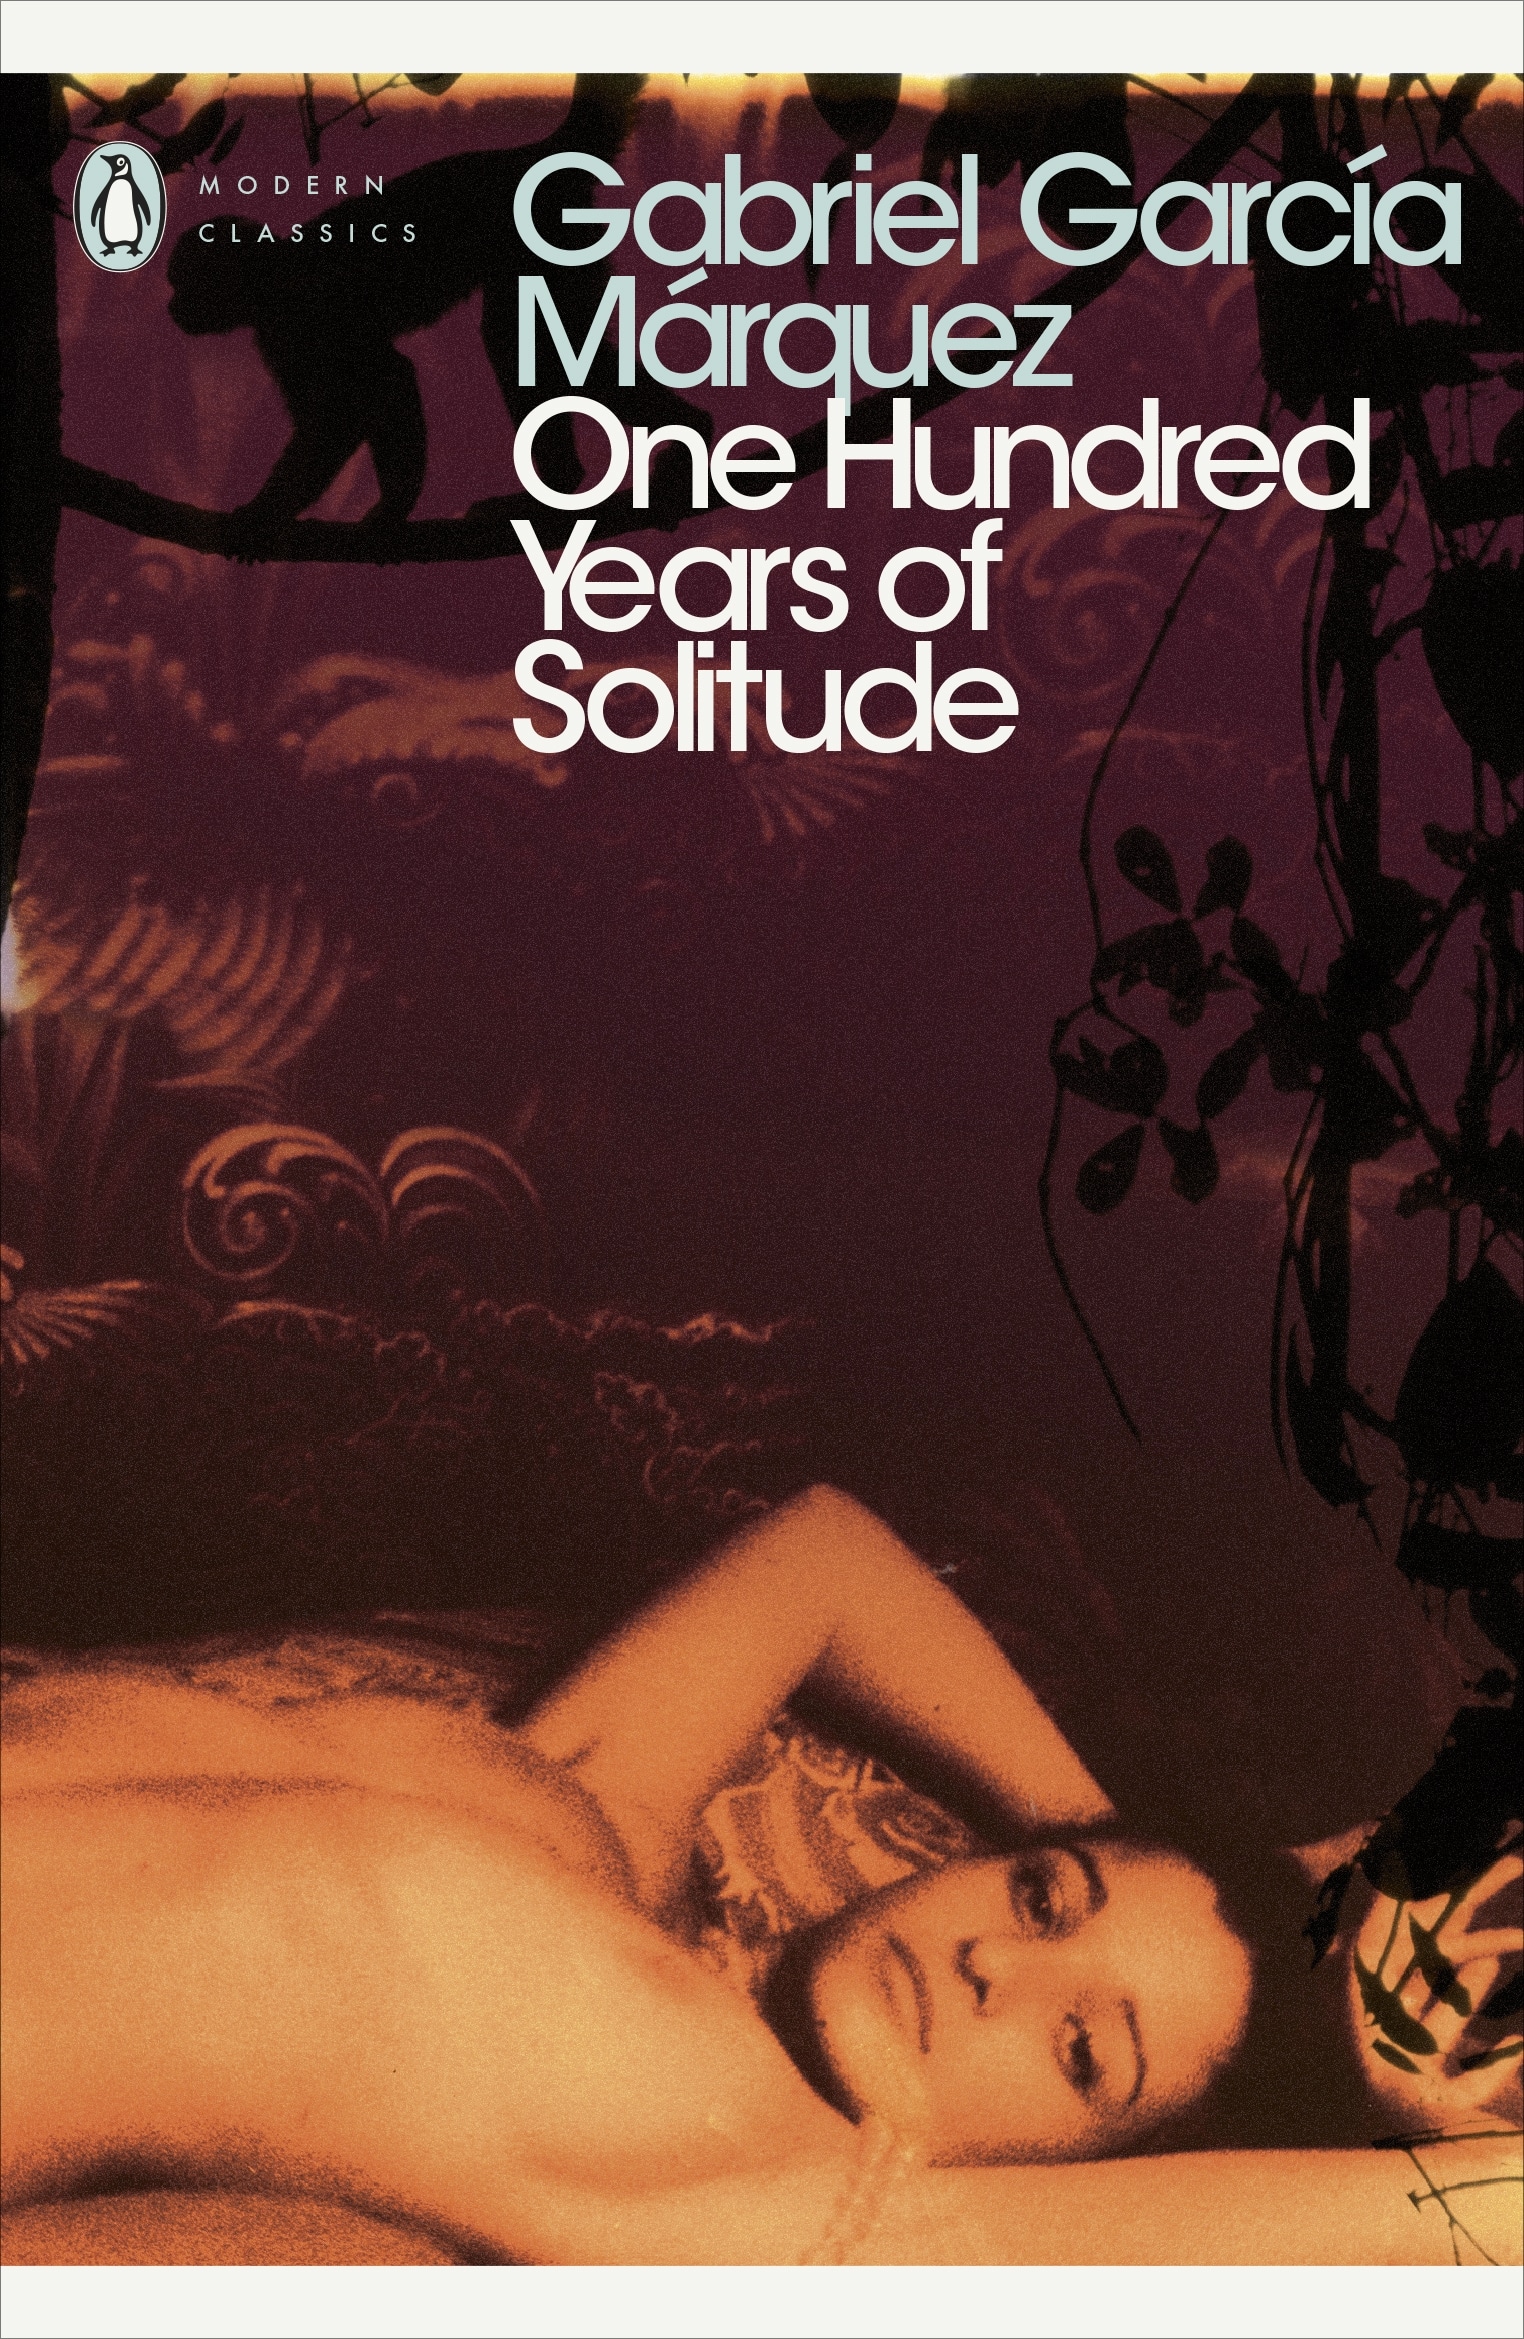 Book “One Hundred Years of Solitude” by Gabriel Garcia Marquez — August 31, 2000